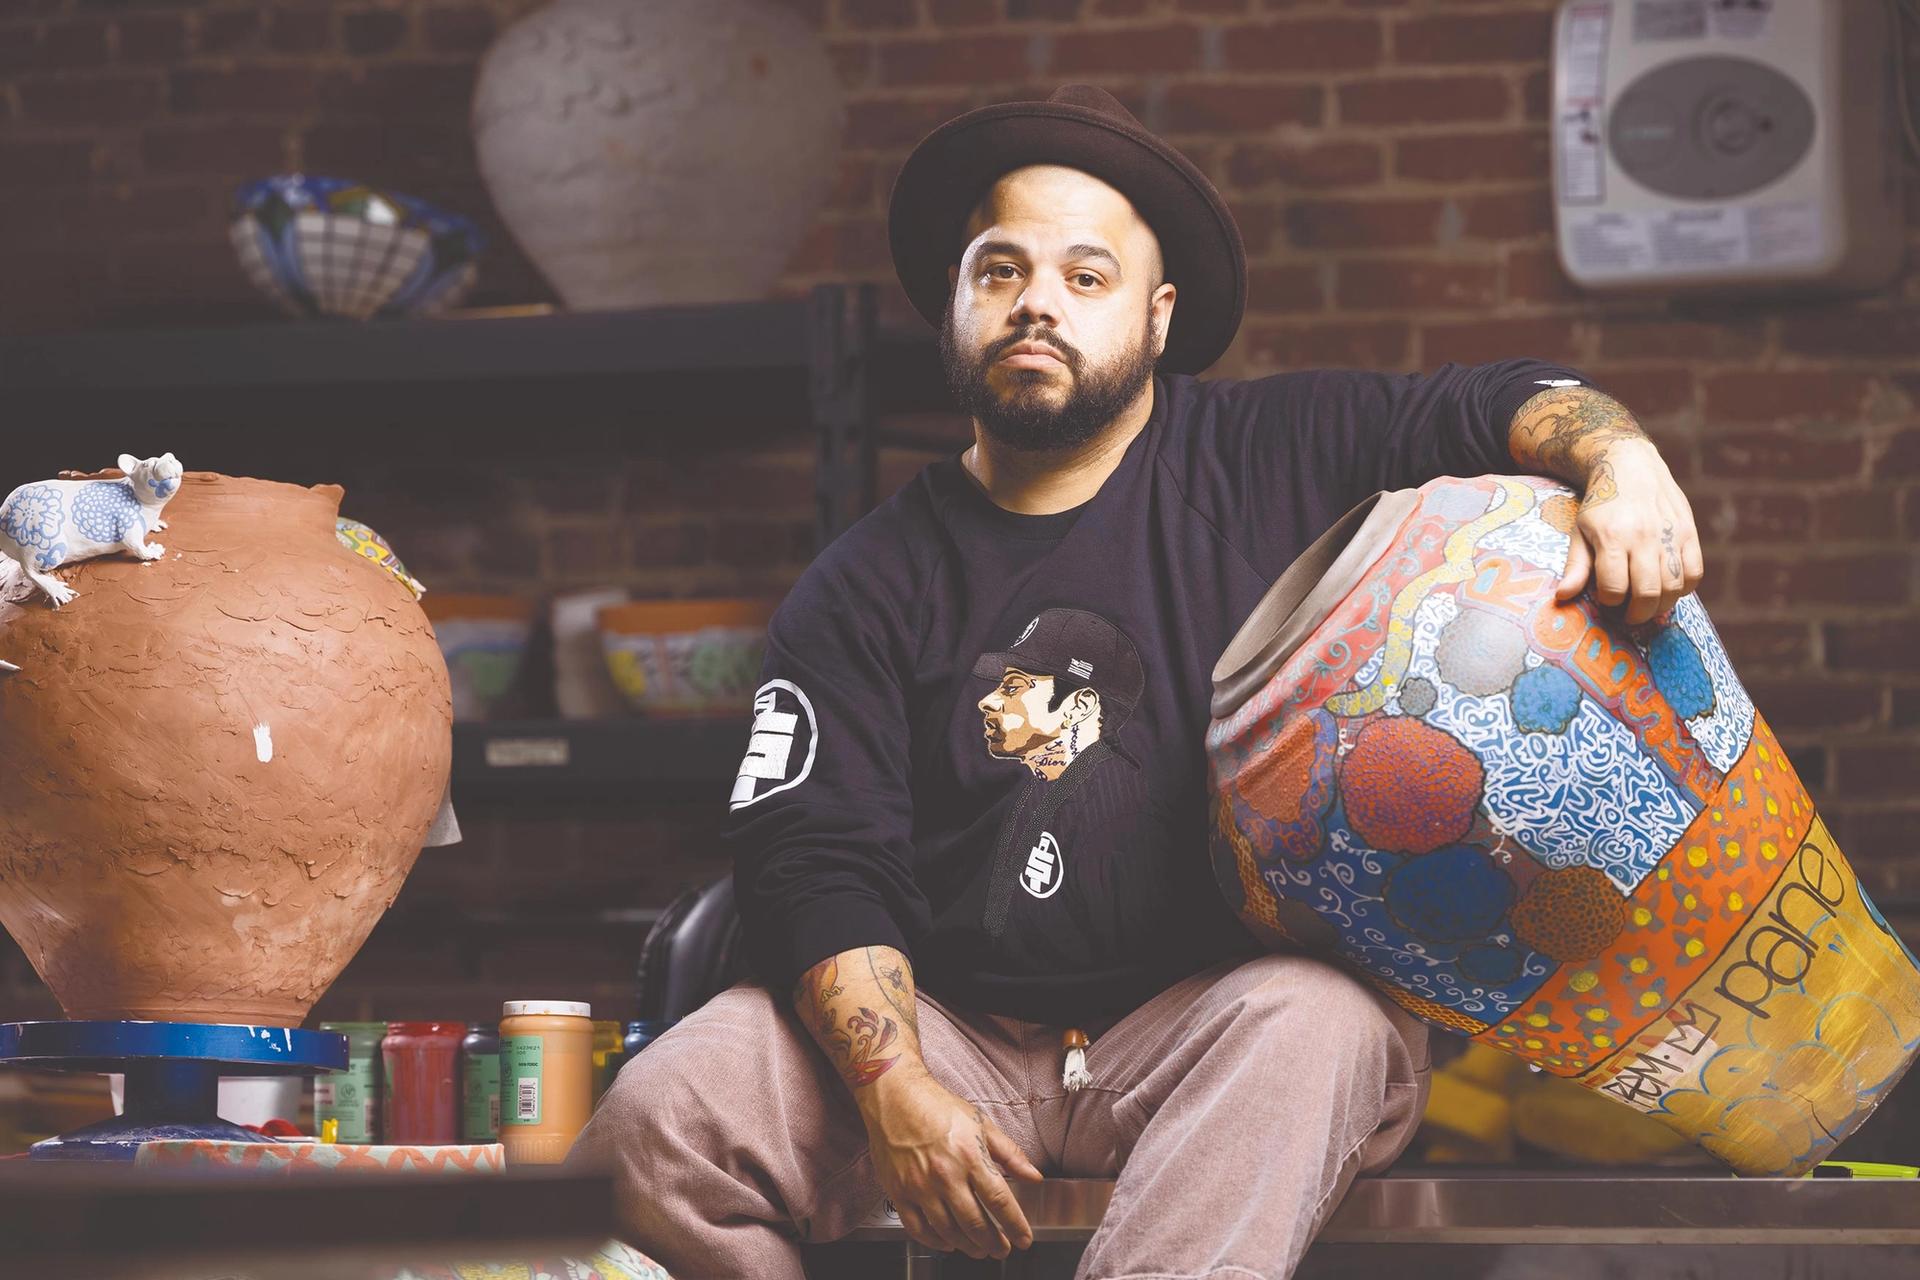 Roberto Lugo has returned to his roots in Philadelphia, which is home to a burgeoning craft culture Photo: Ryan Collerd, courtesy of the Pew Center for Arts and Heritage